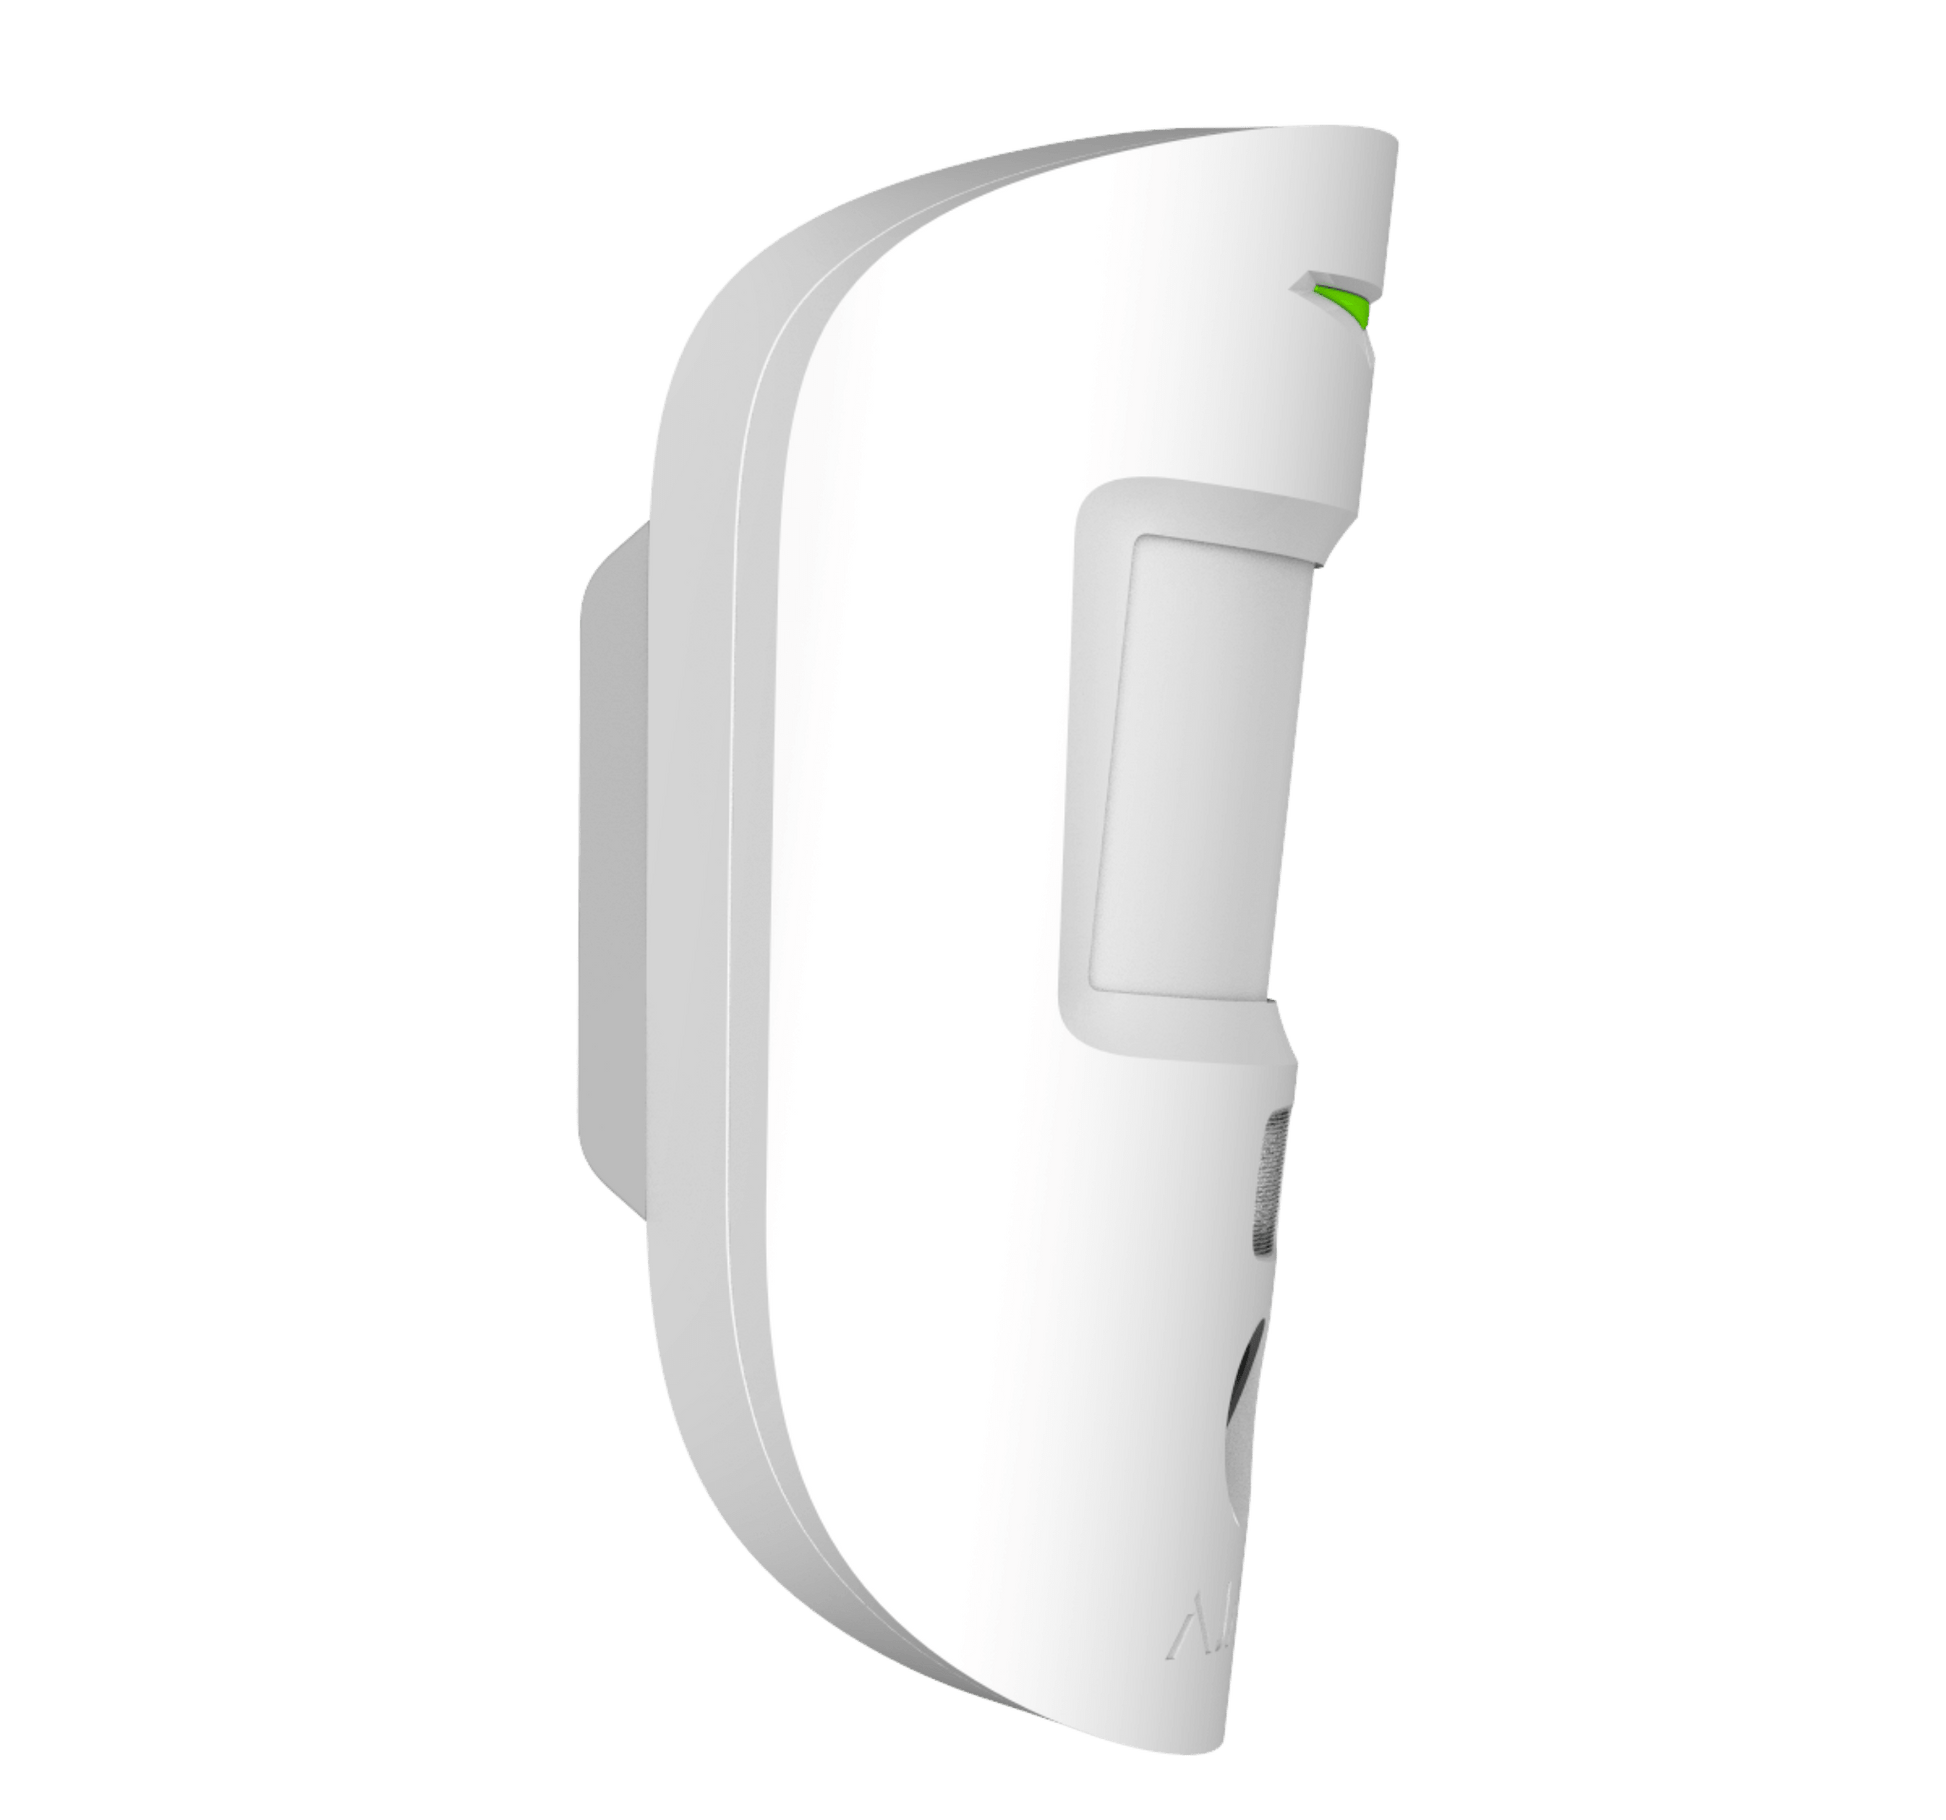 White Ajax MotionCam a wireless motion detector with a built in camera for home and business security, 110 × 65 × 50 mm in size, 86 grams in weight. side view of device